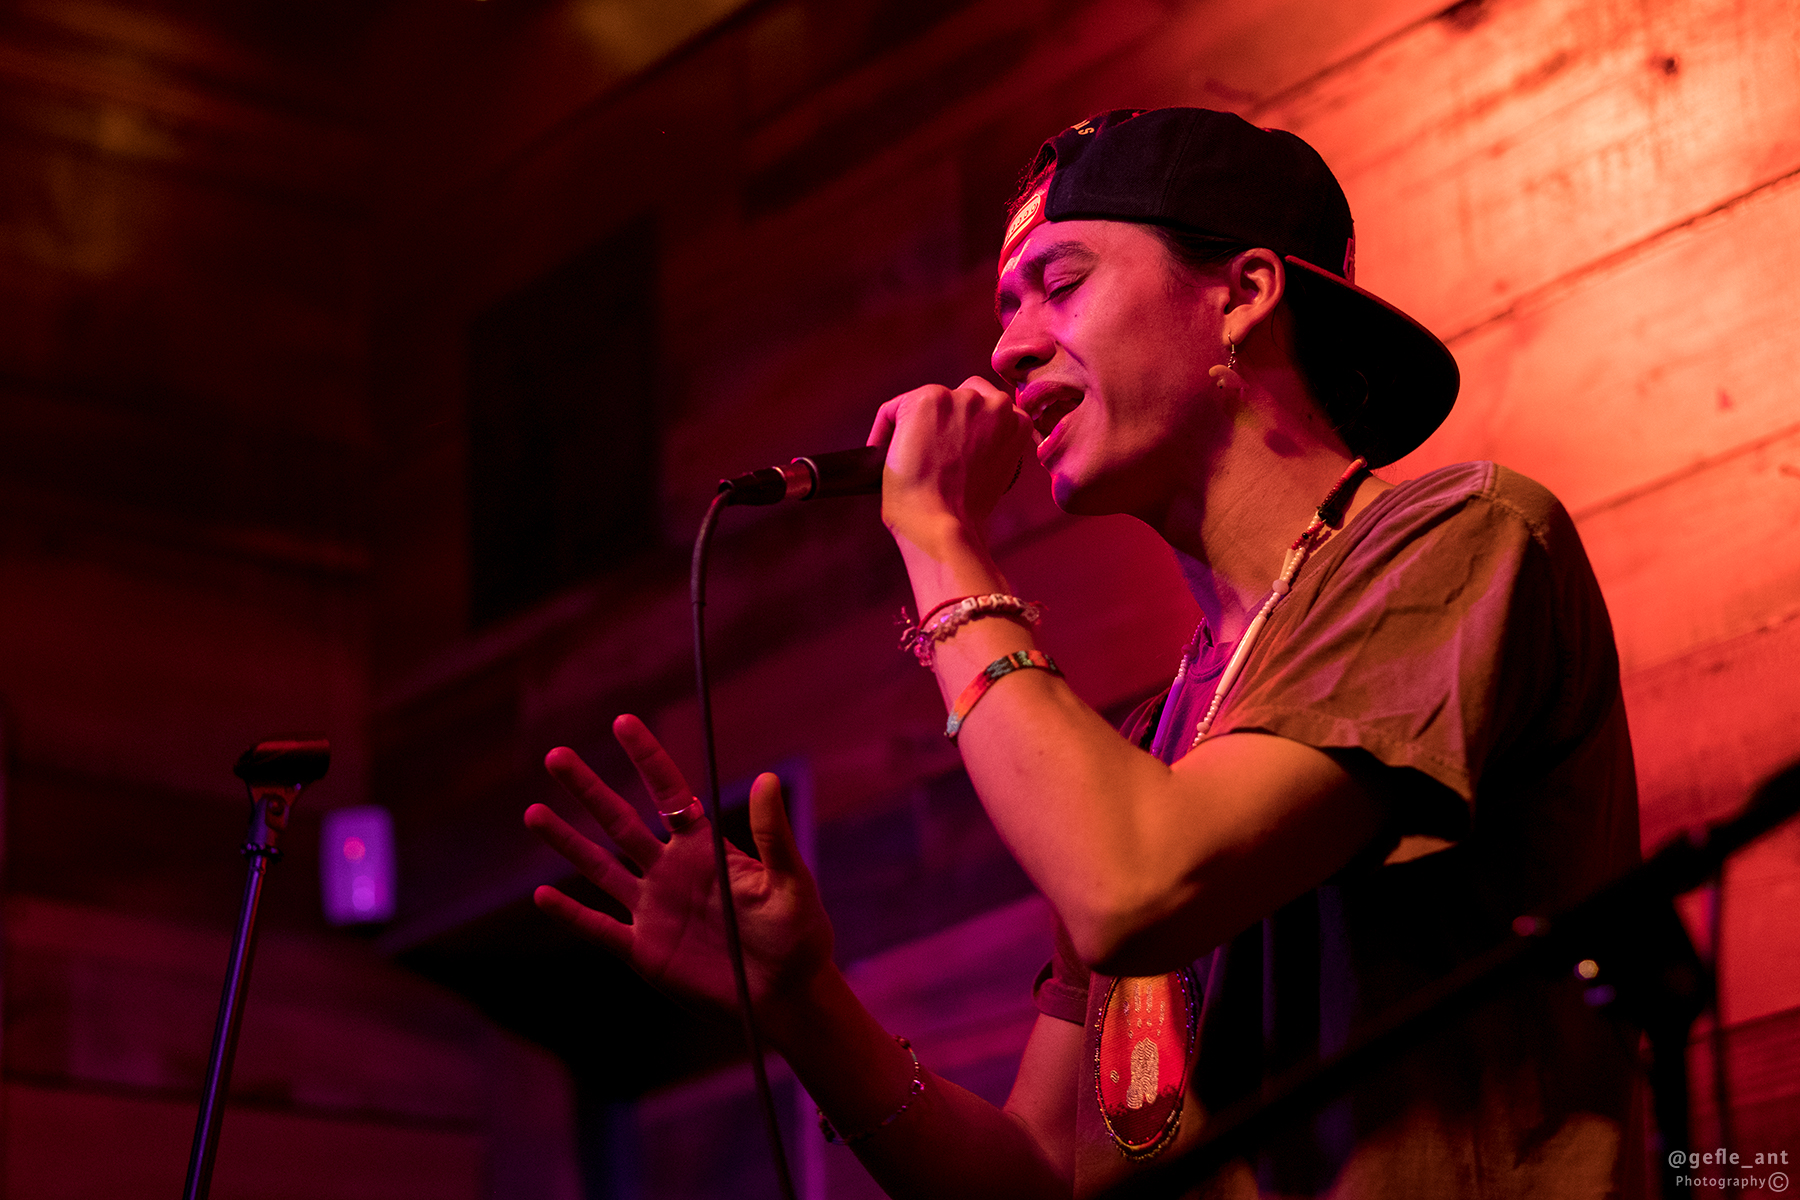 Young man singing and holding microphone